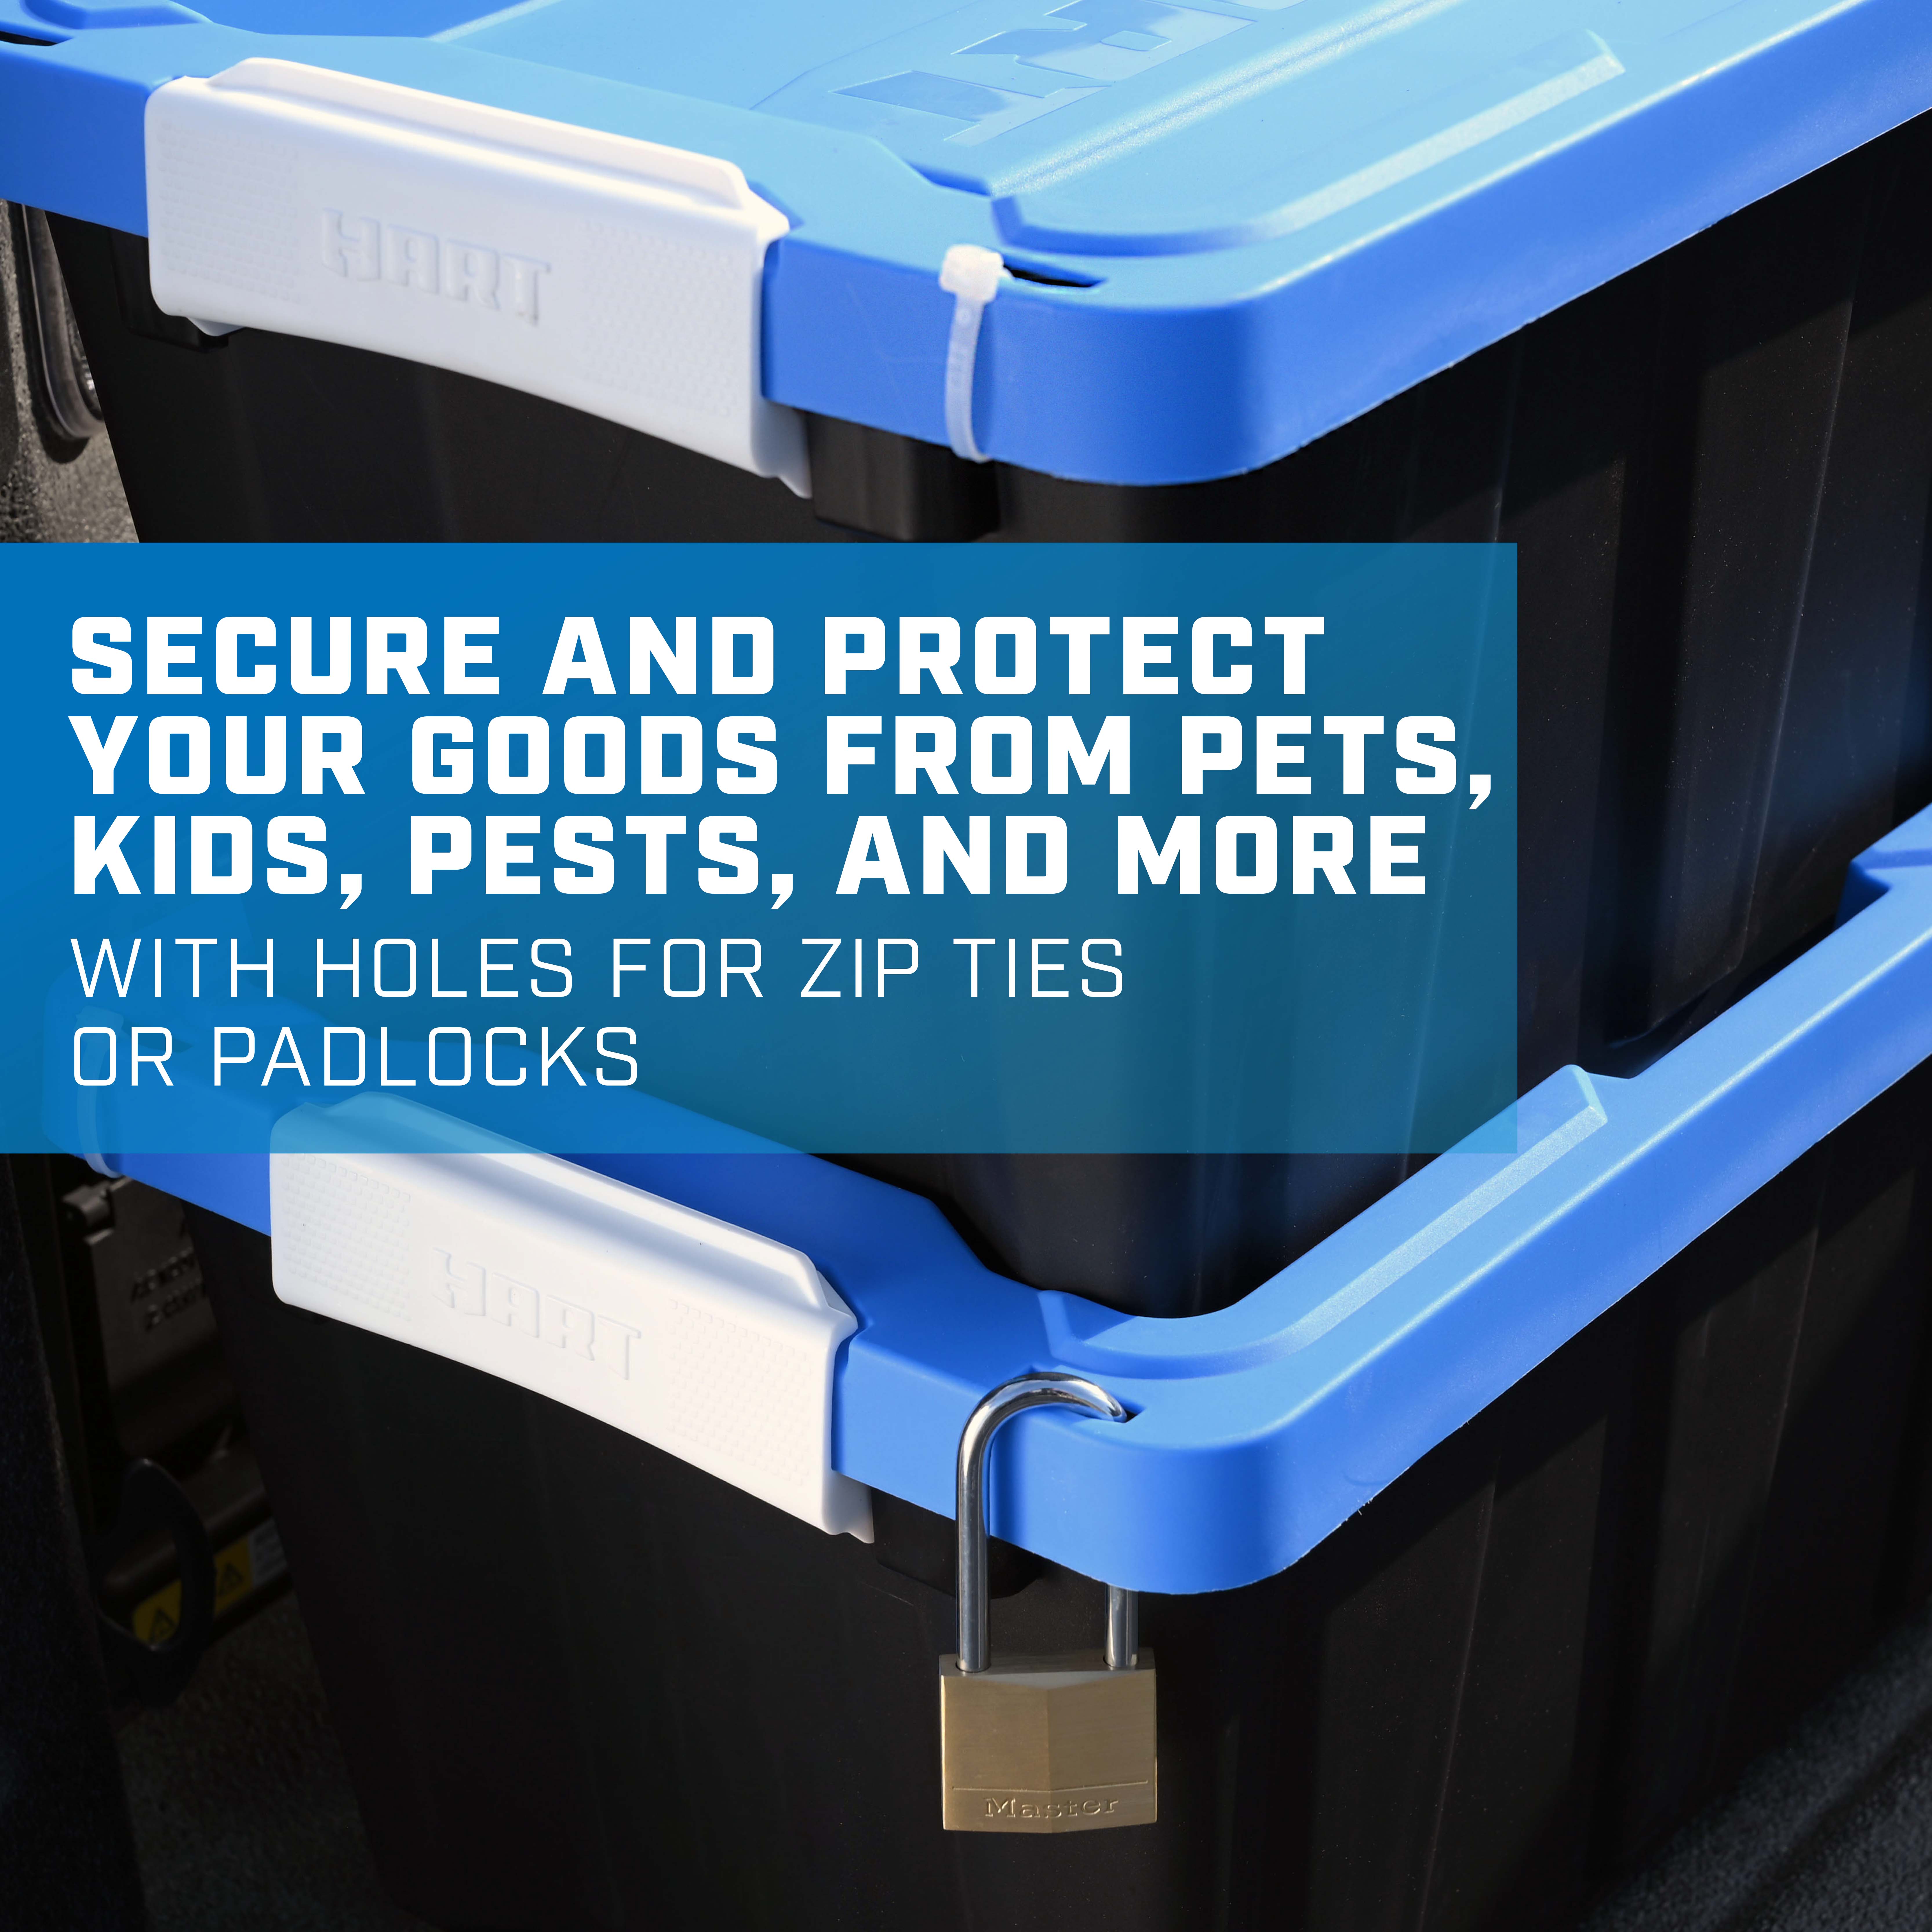 Secure and protect your goods from pets, kids, and pests with holes for zip ties and padlocks